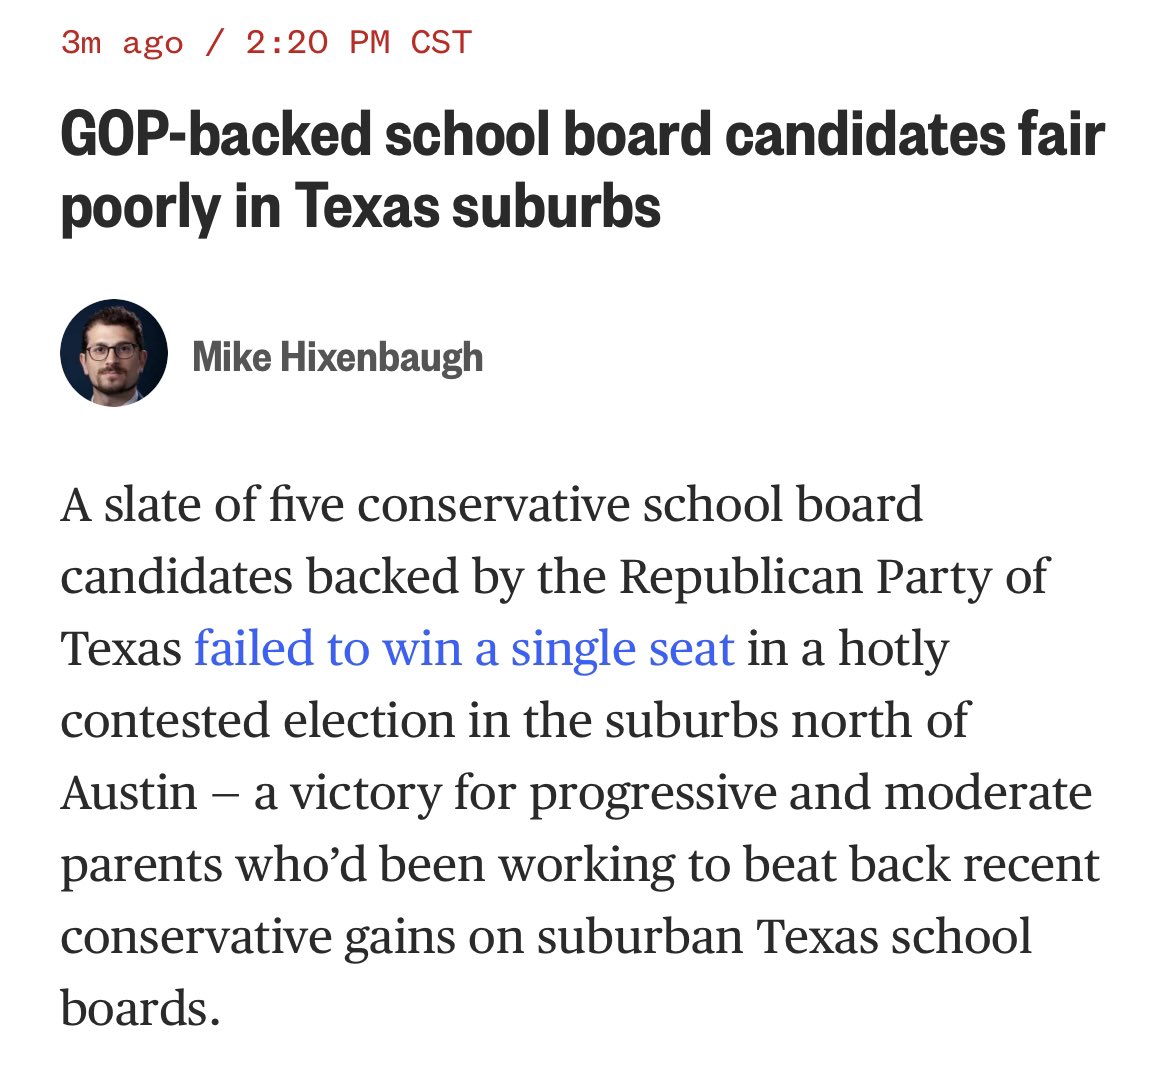 NEW on @NBCNews: The Texas GOP pledged to take an active role in local school boards this year, explicitly endorsing 11 candidates opposed to discussions on race, sex and LGBTQ identities. All but TWO of those candidates lost on Tuesday. Read more here: nbcnews.com/politics/2022-…